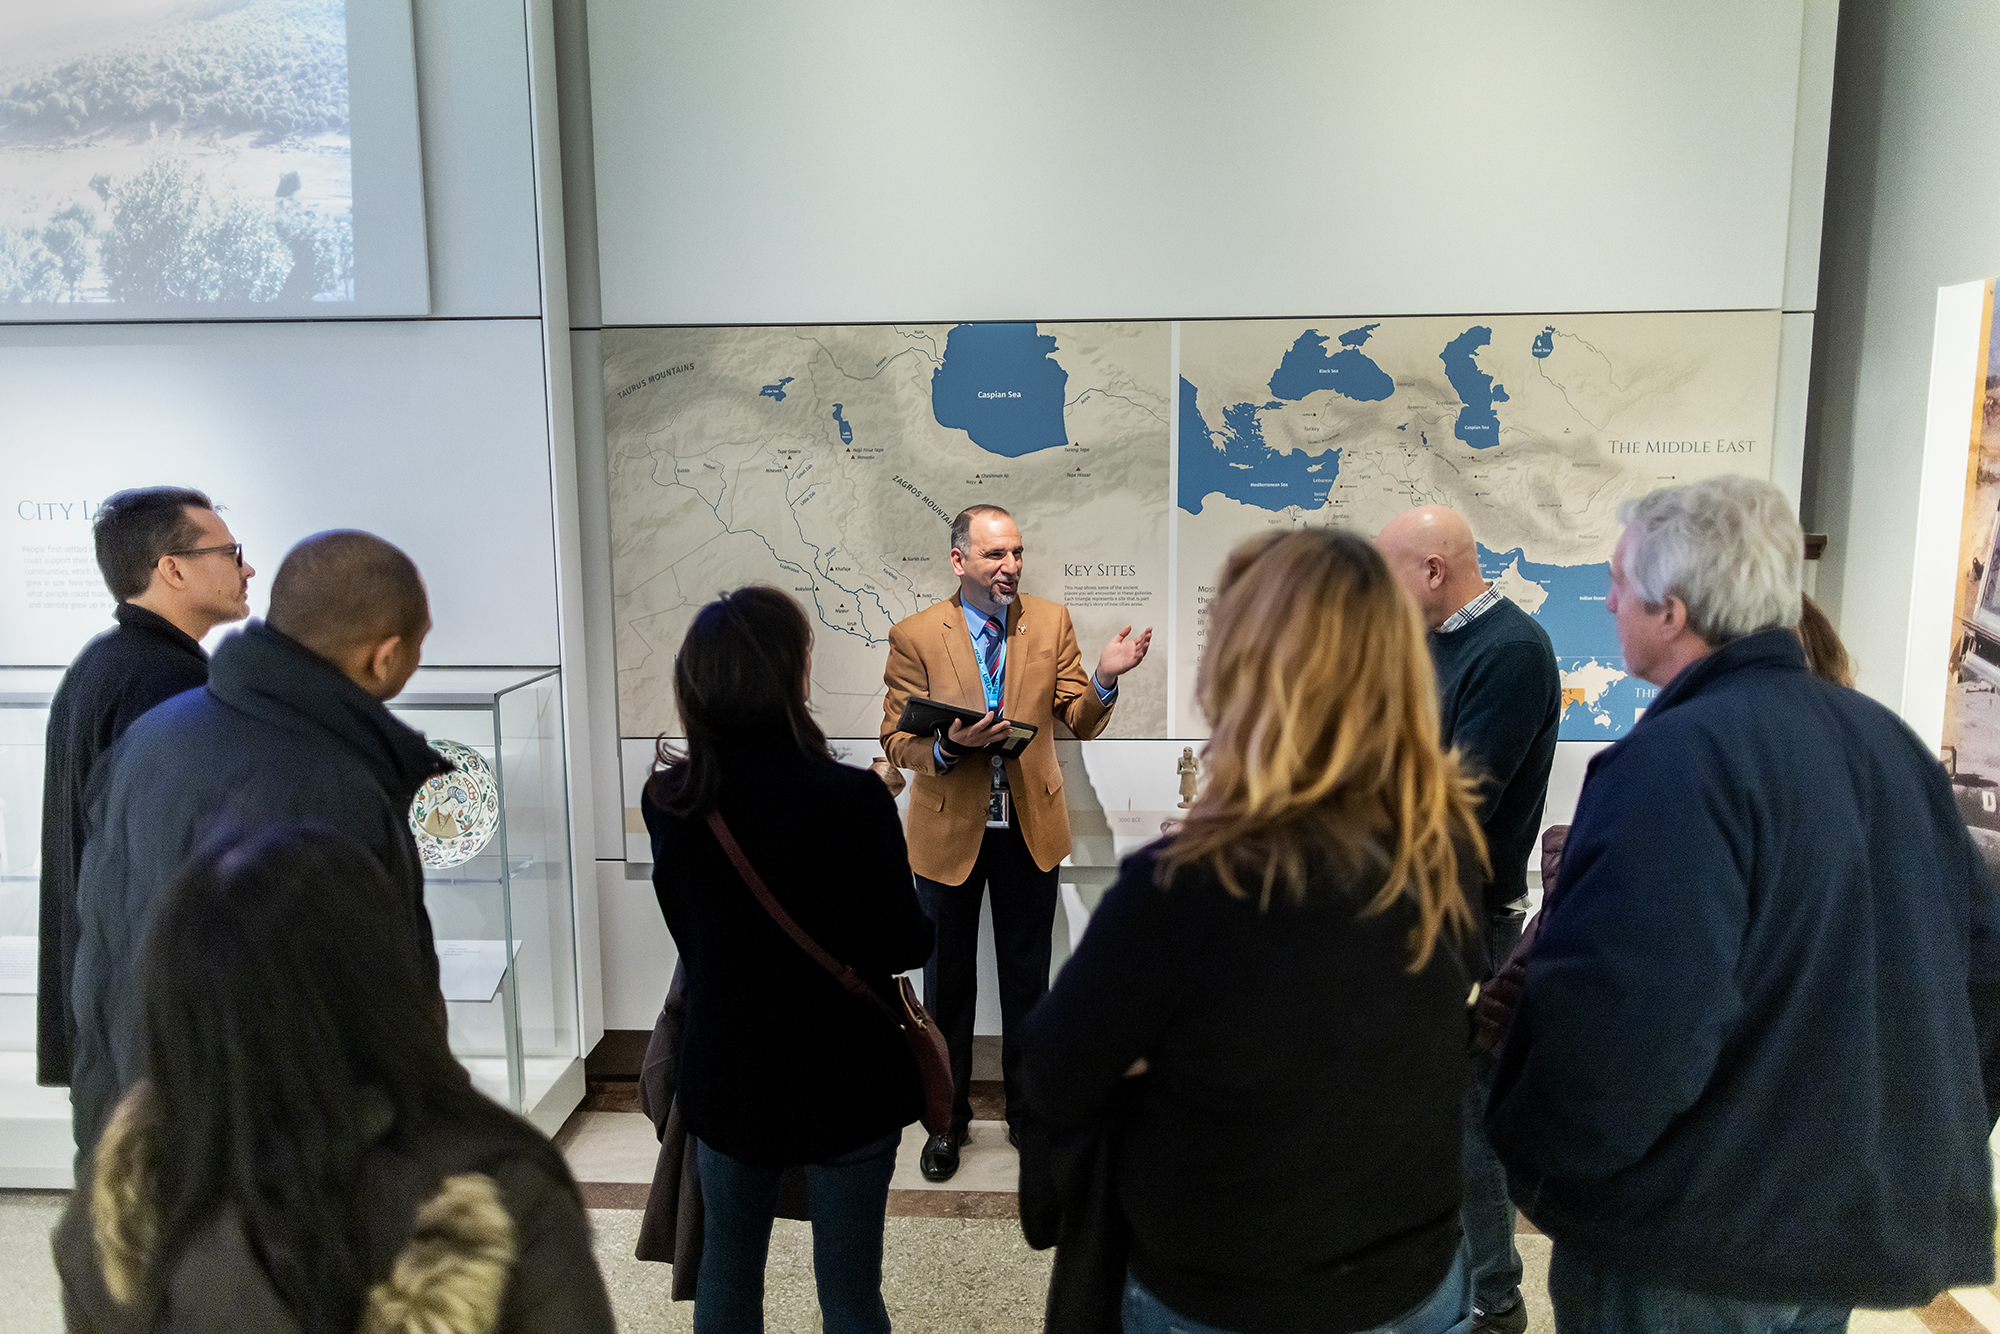 Yaroub Al-Obaidi gestures while speaking to a tour group in the Penn Museum's Middle East Galleries.